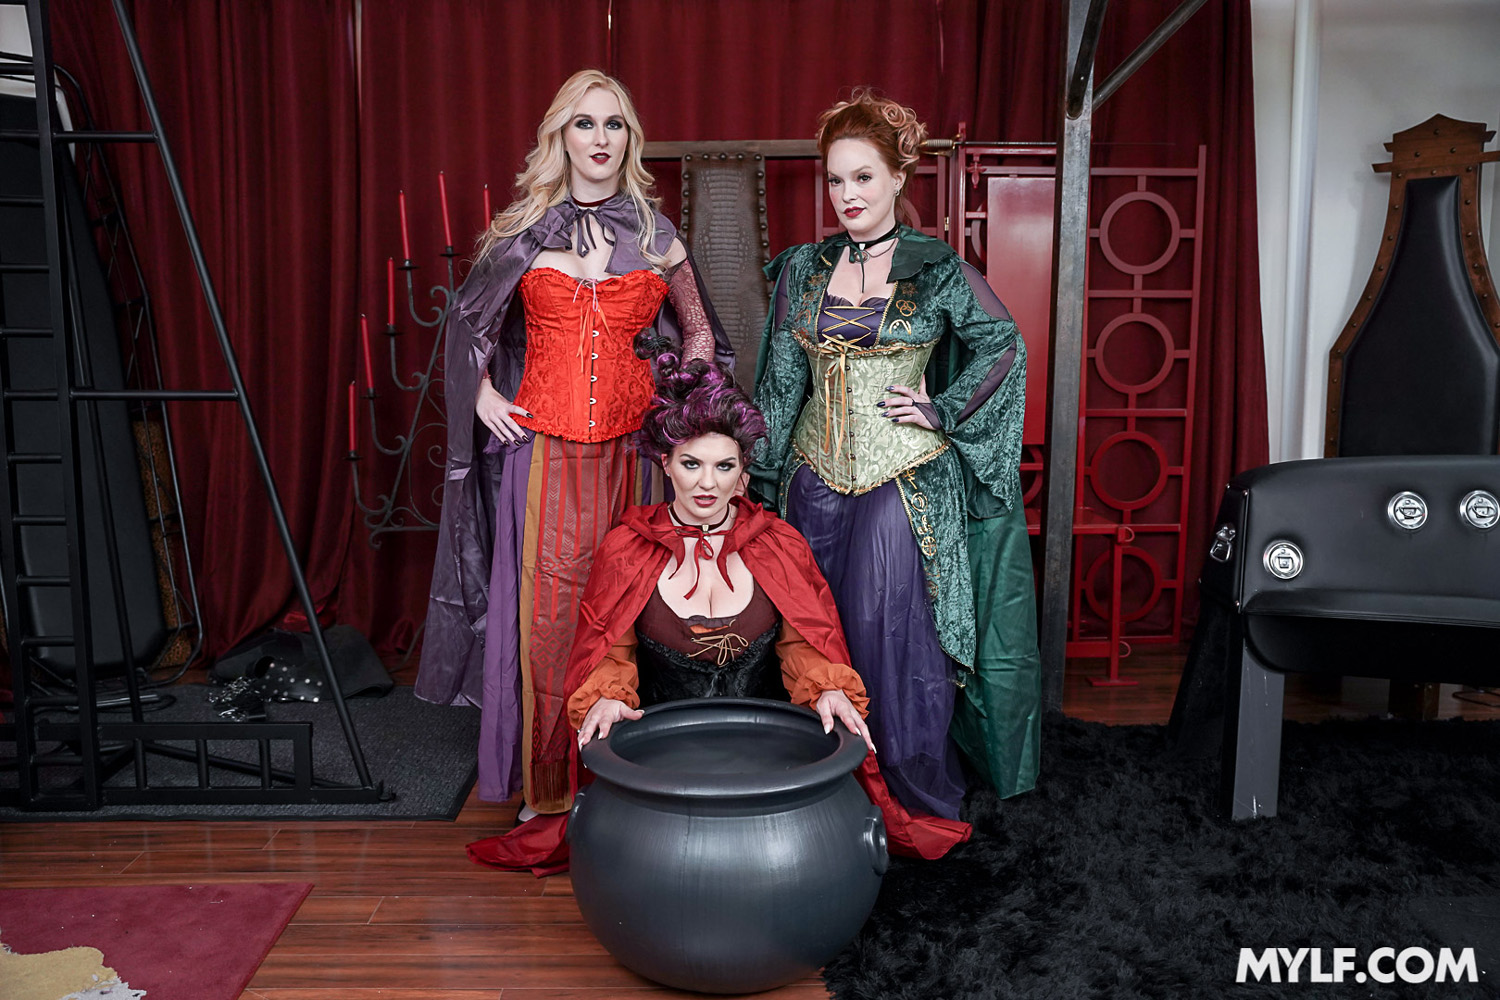 Emmy Demure shares cock on Halloween with witches Audrey Madison and Summer Hart